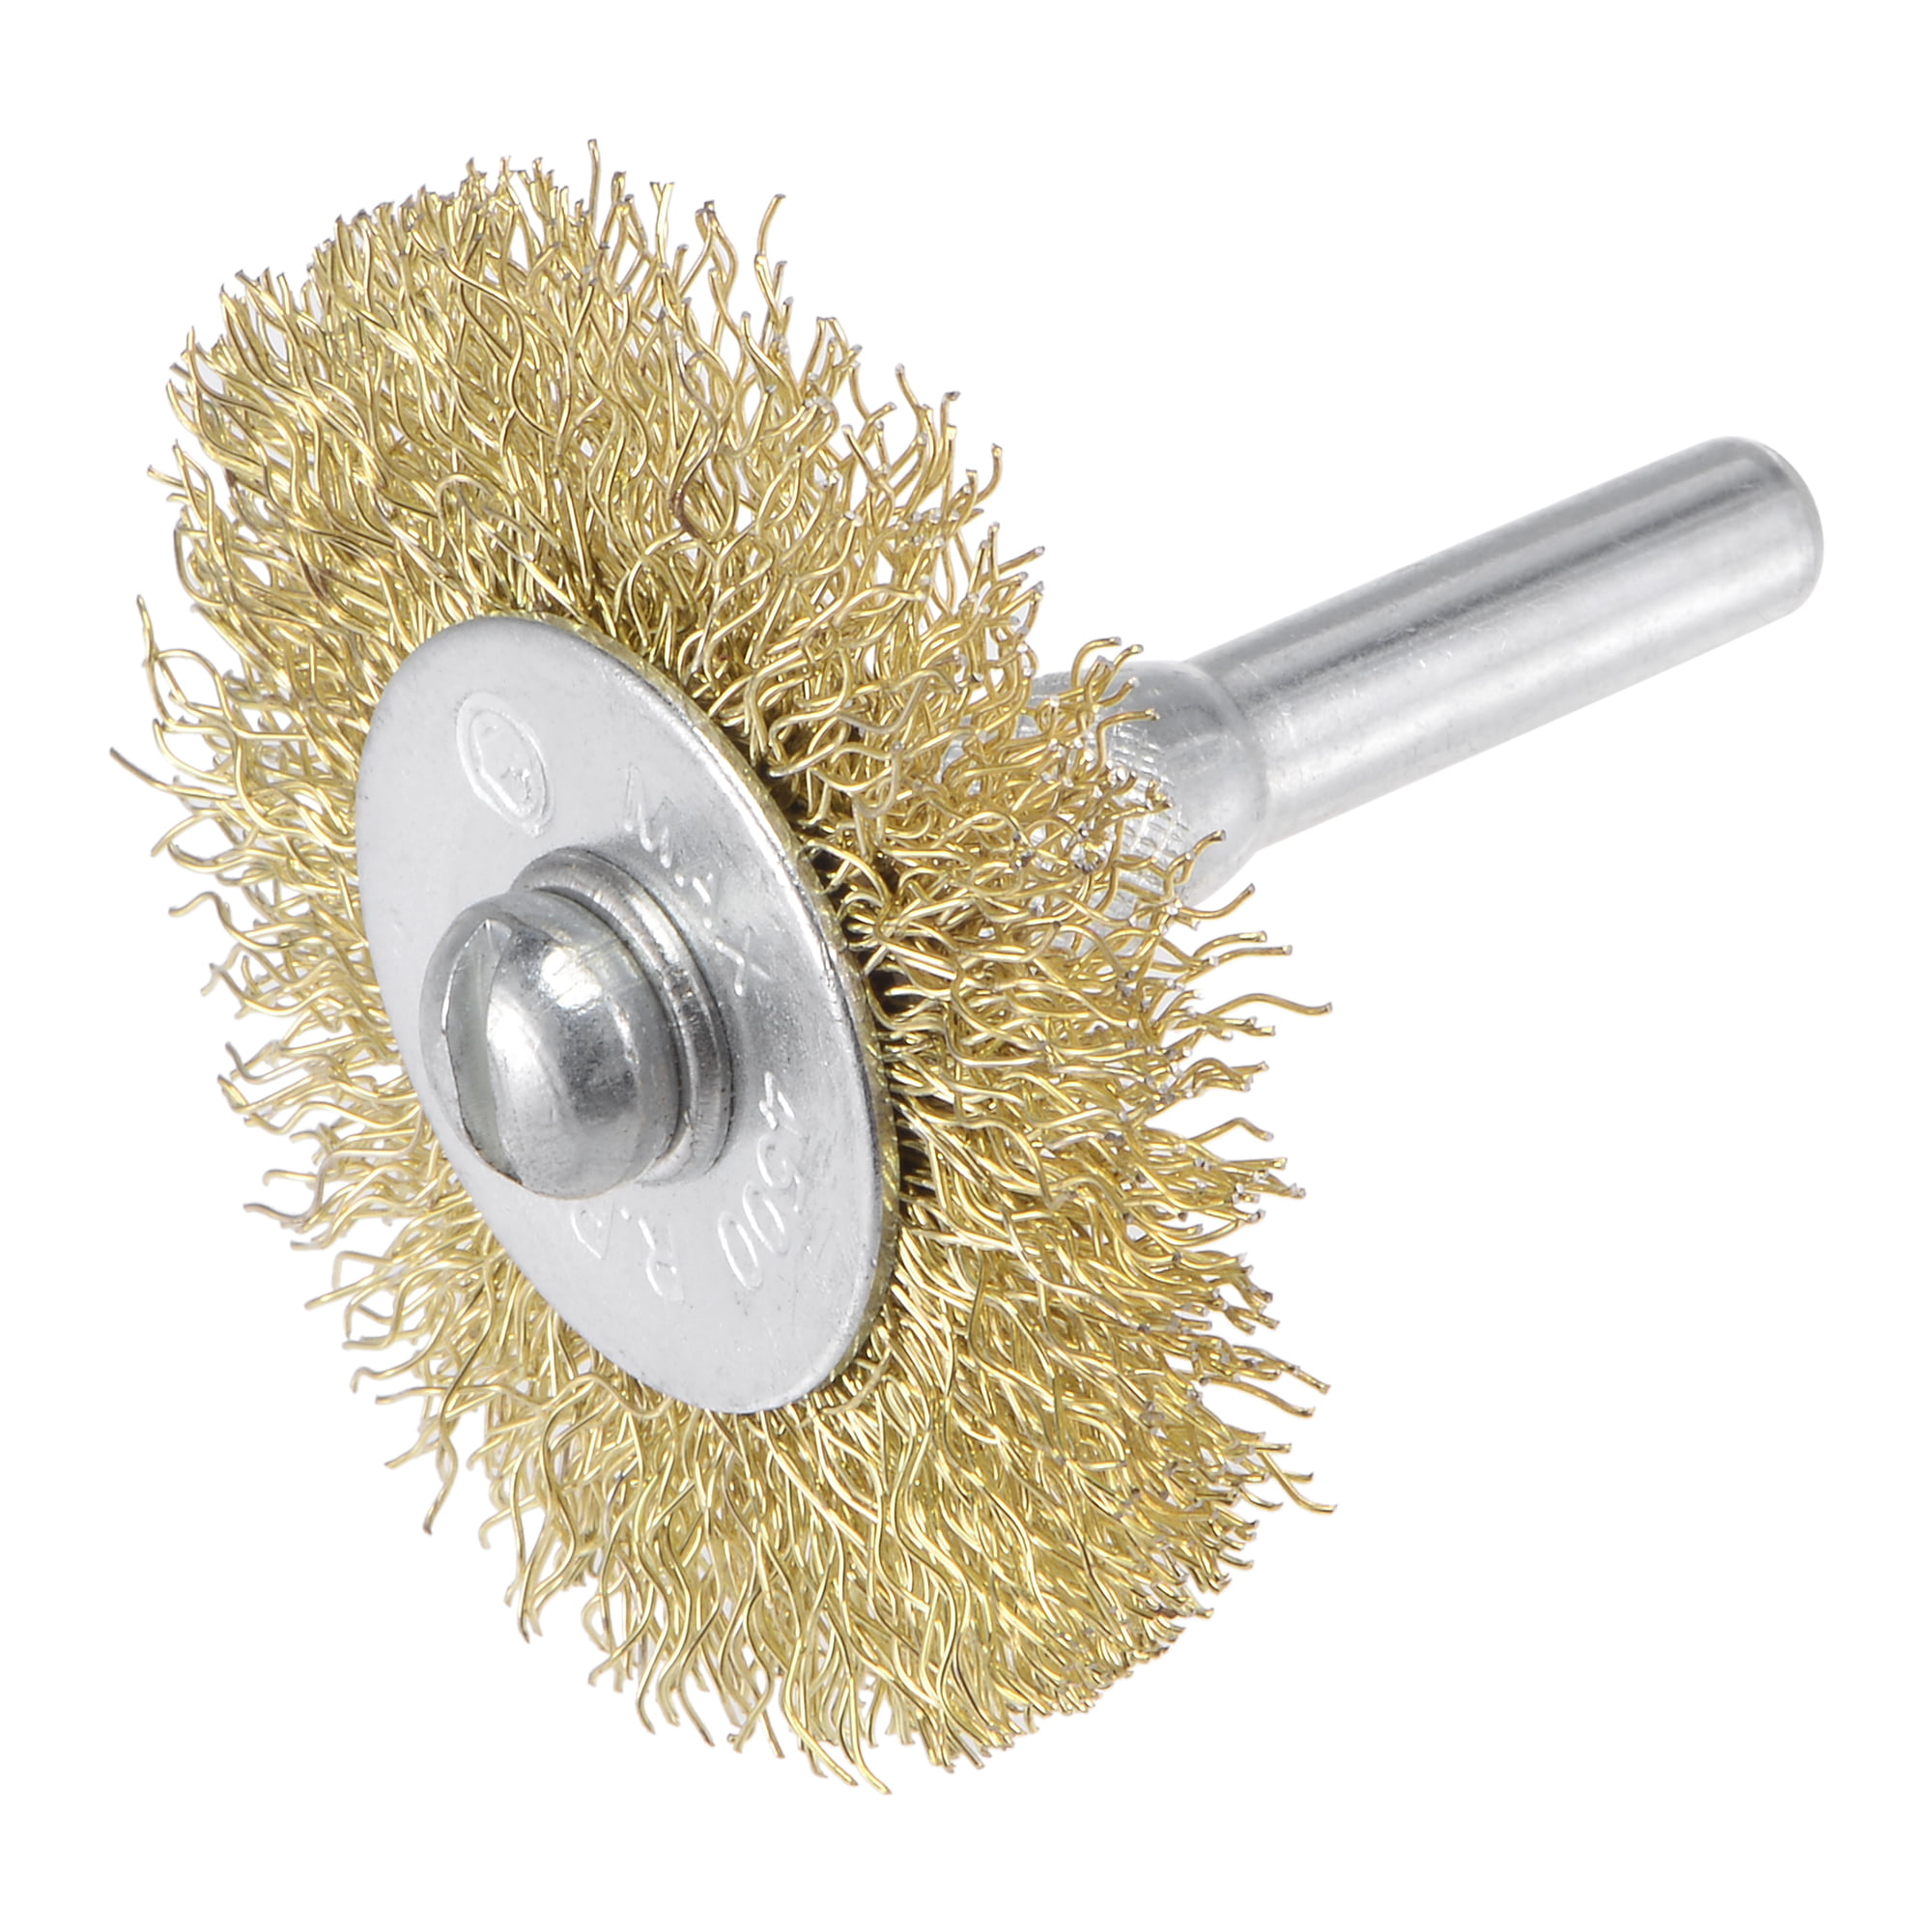 uxcell 3-Inch Wire Wheel Brush Bench Brass Plated Crimped Steel 1/4-Inch Shank 